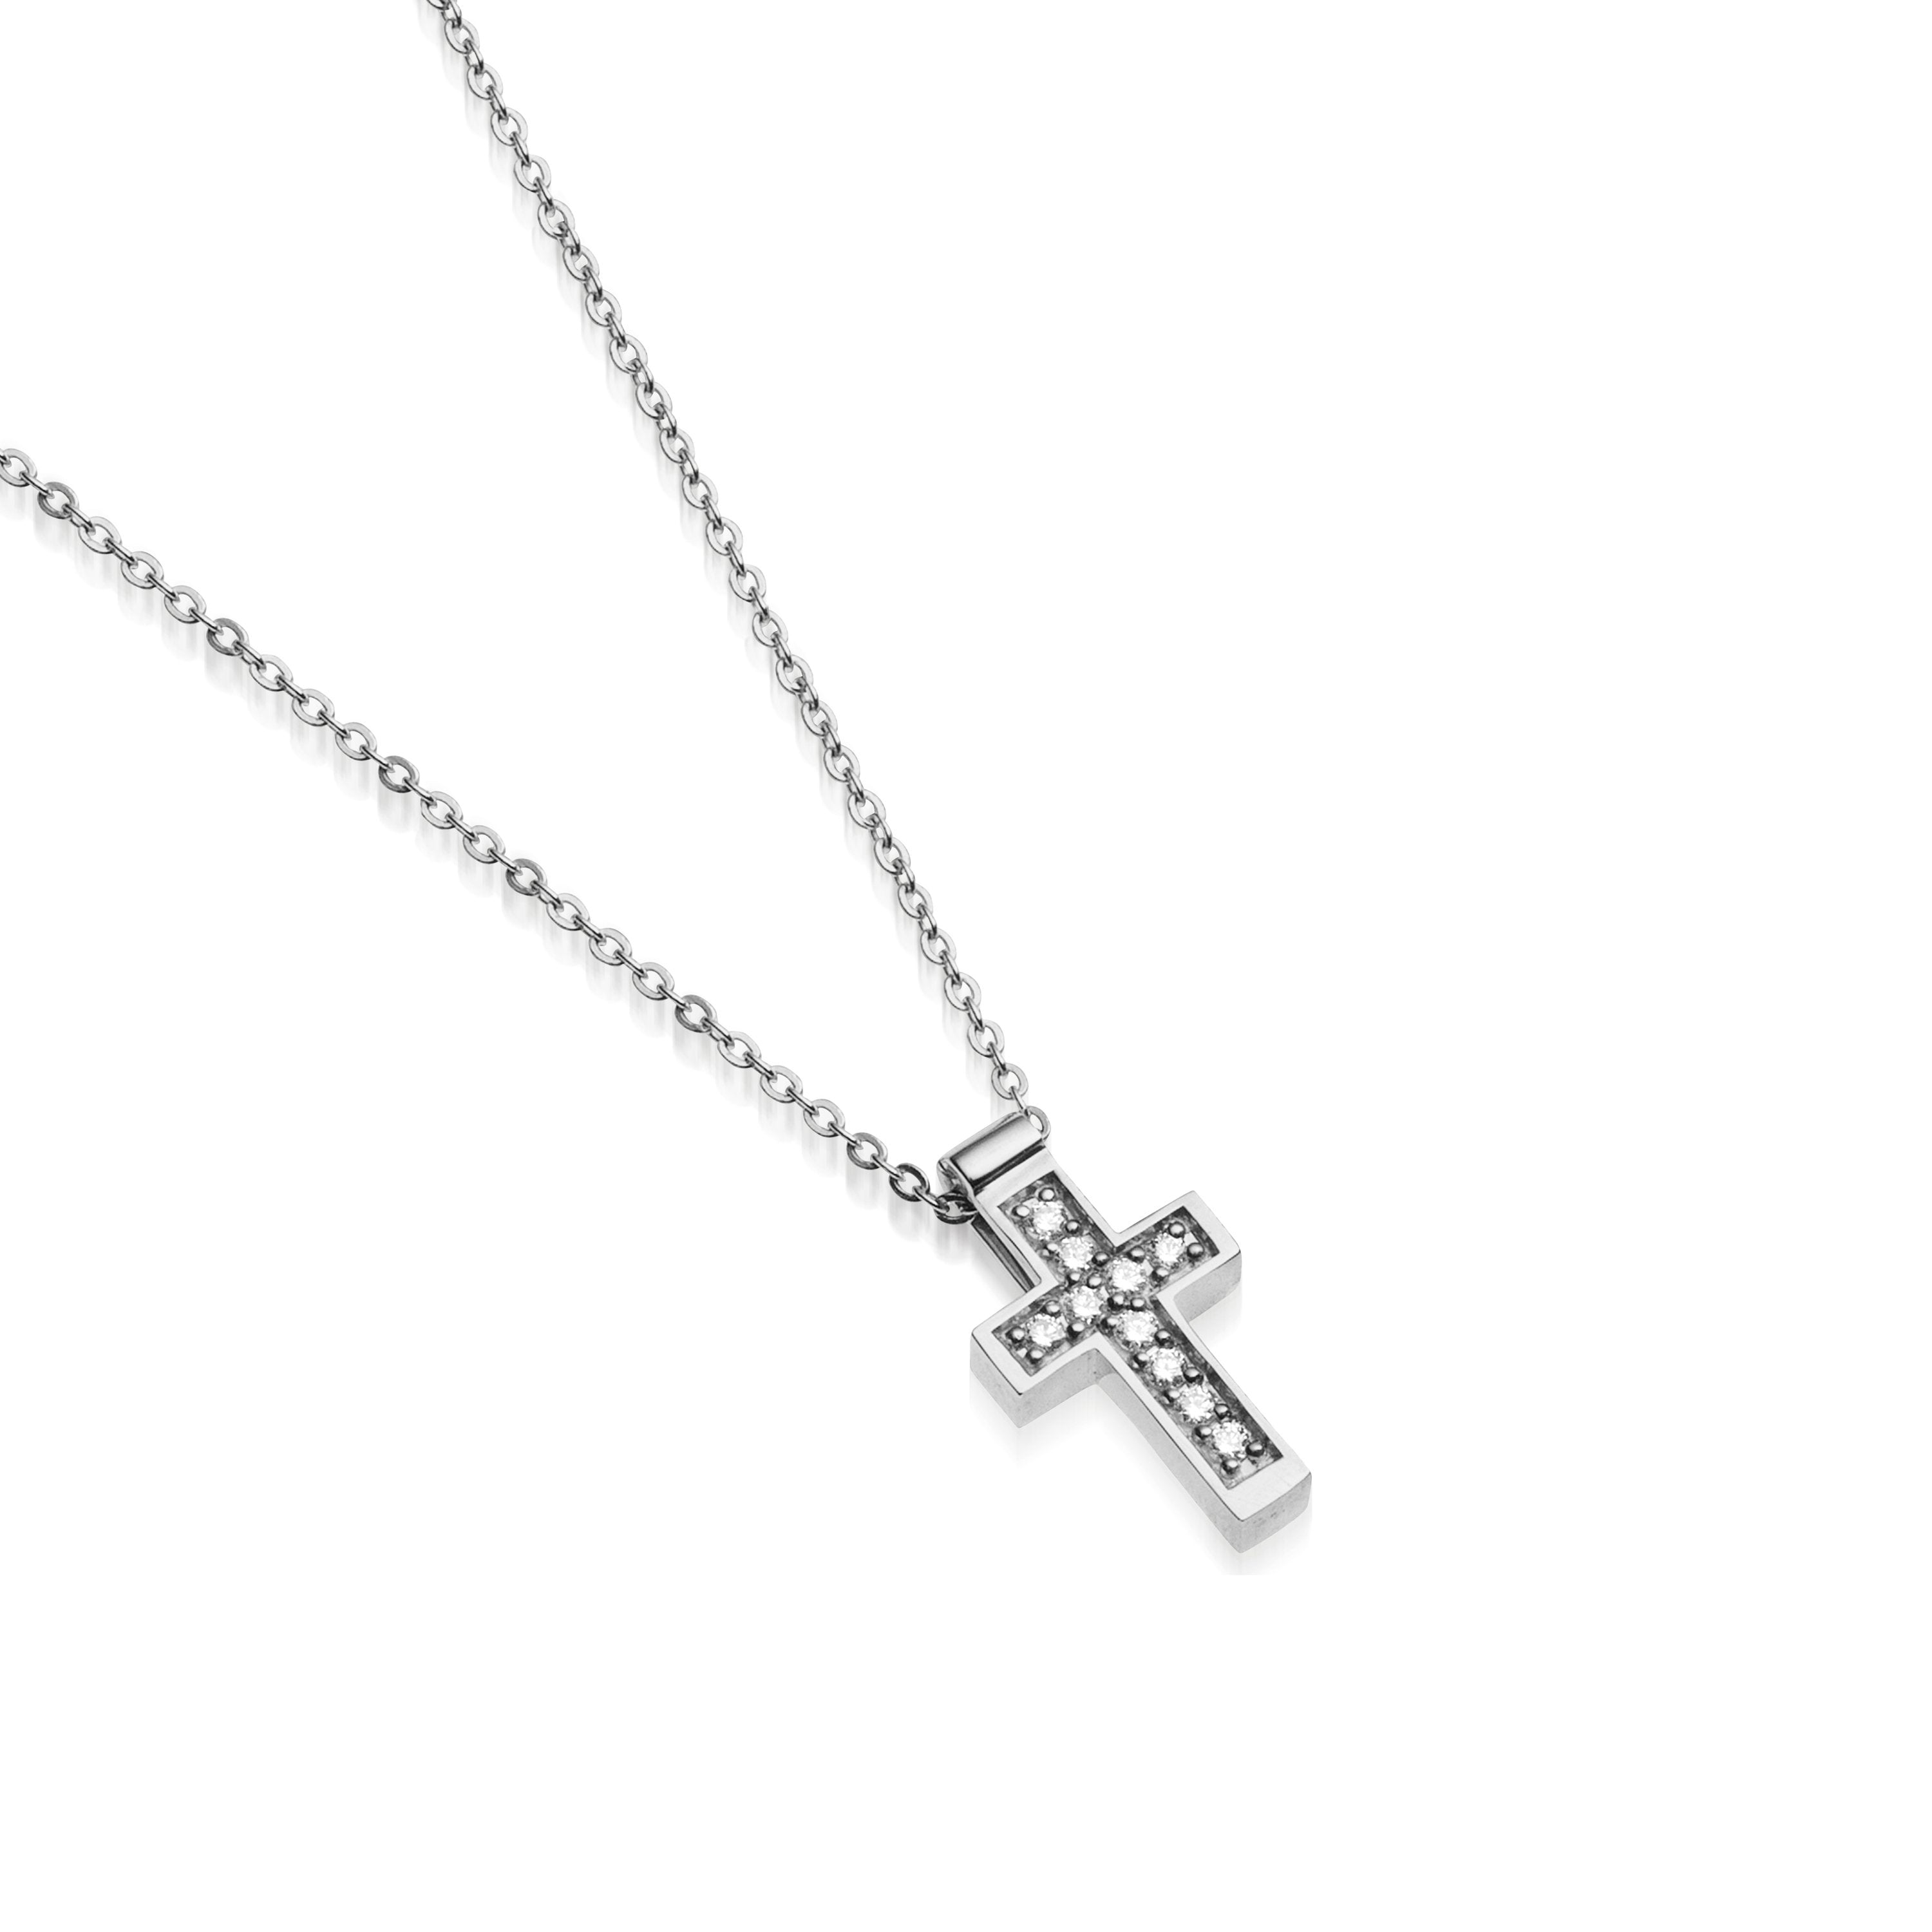 Amazon.com: TOUPOP Cross Necklace for Women 925 Sterling Silver Faith Cross  Pendant Necklace with January Birthstone Garnet Necklace Fashion Religious  Jewelry Gifts : Clothing, Shoes & Jewelry